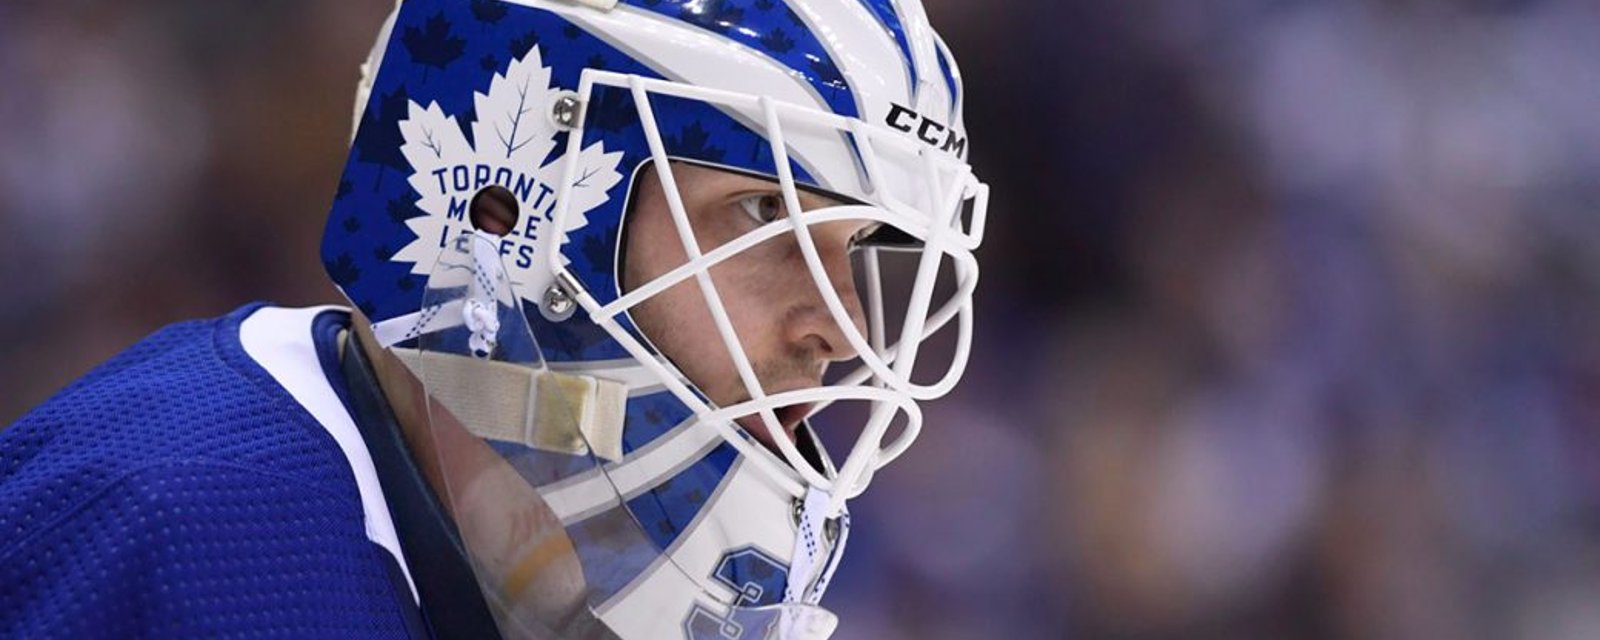 The Maple Leafs have traded goaltender Michael Hutchinson.